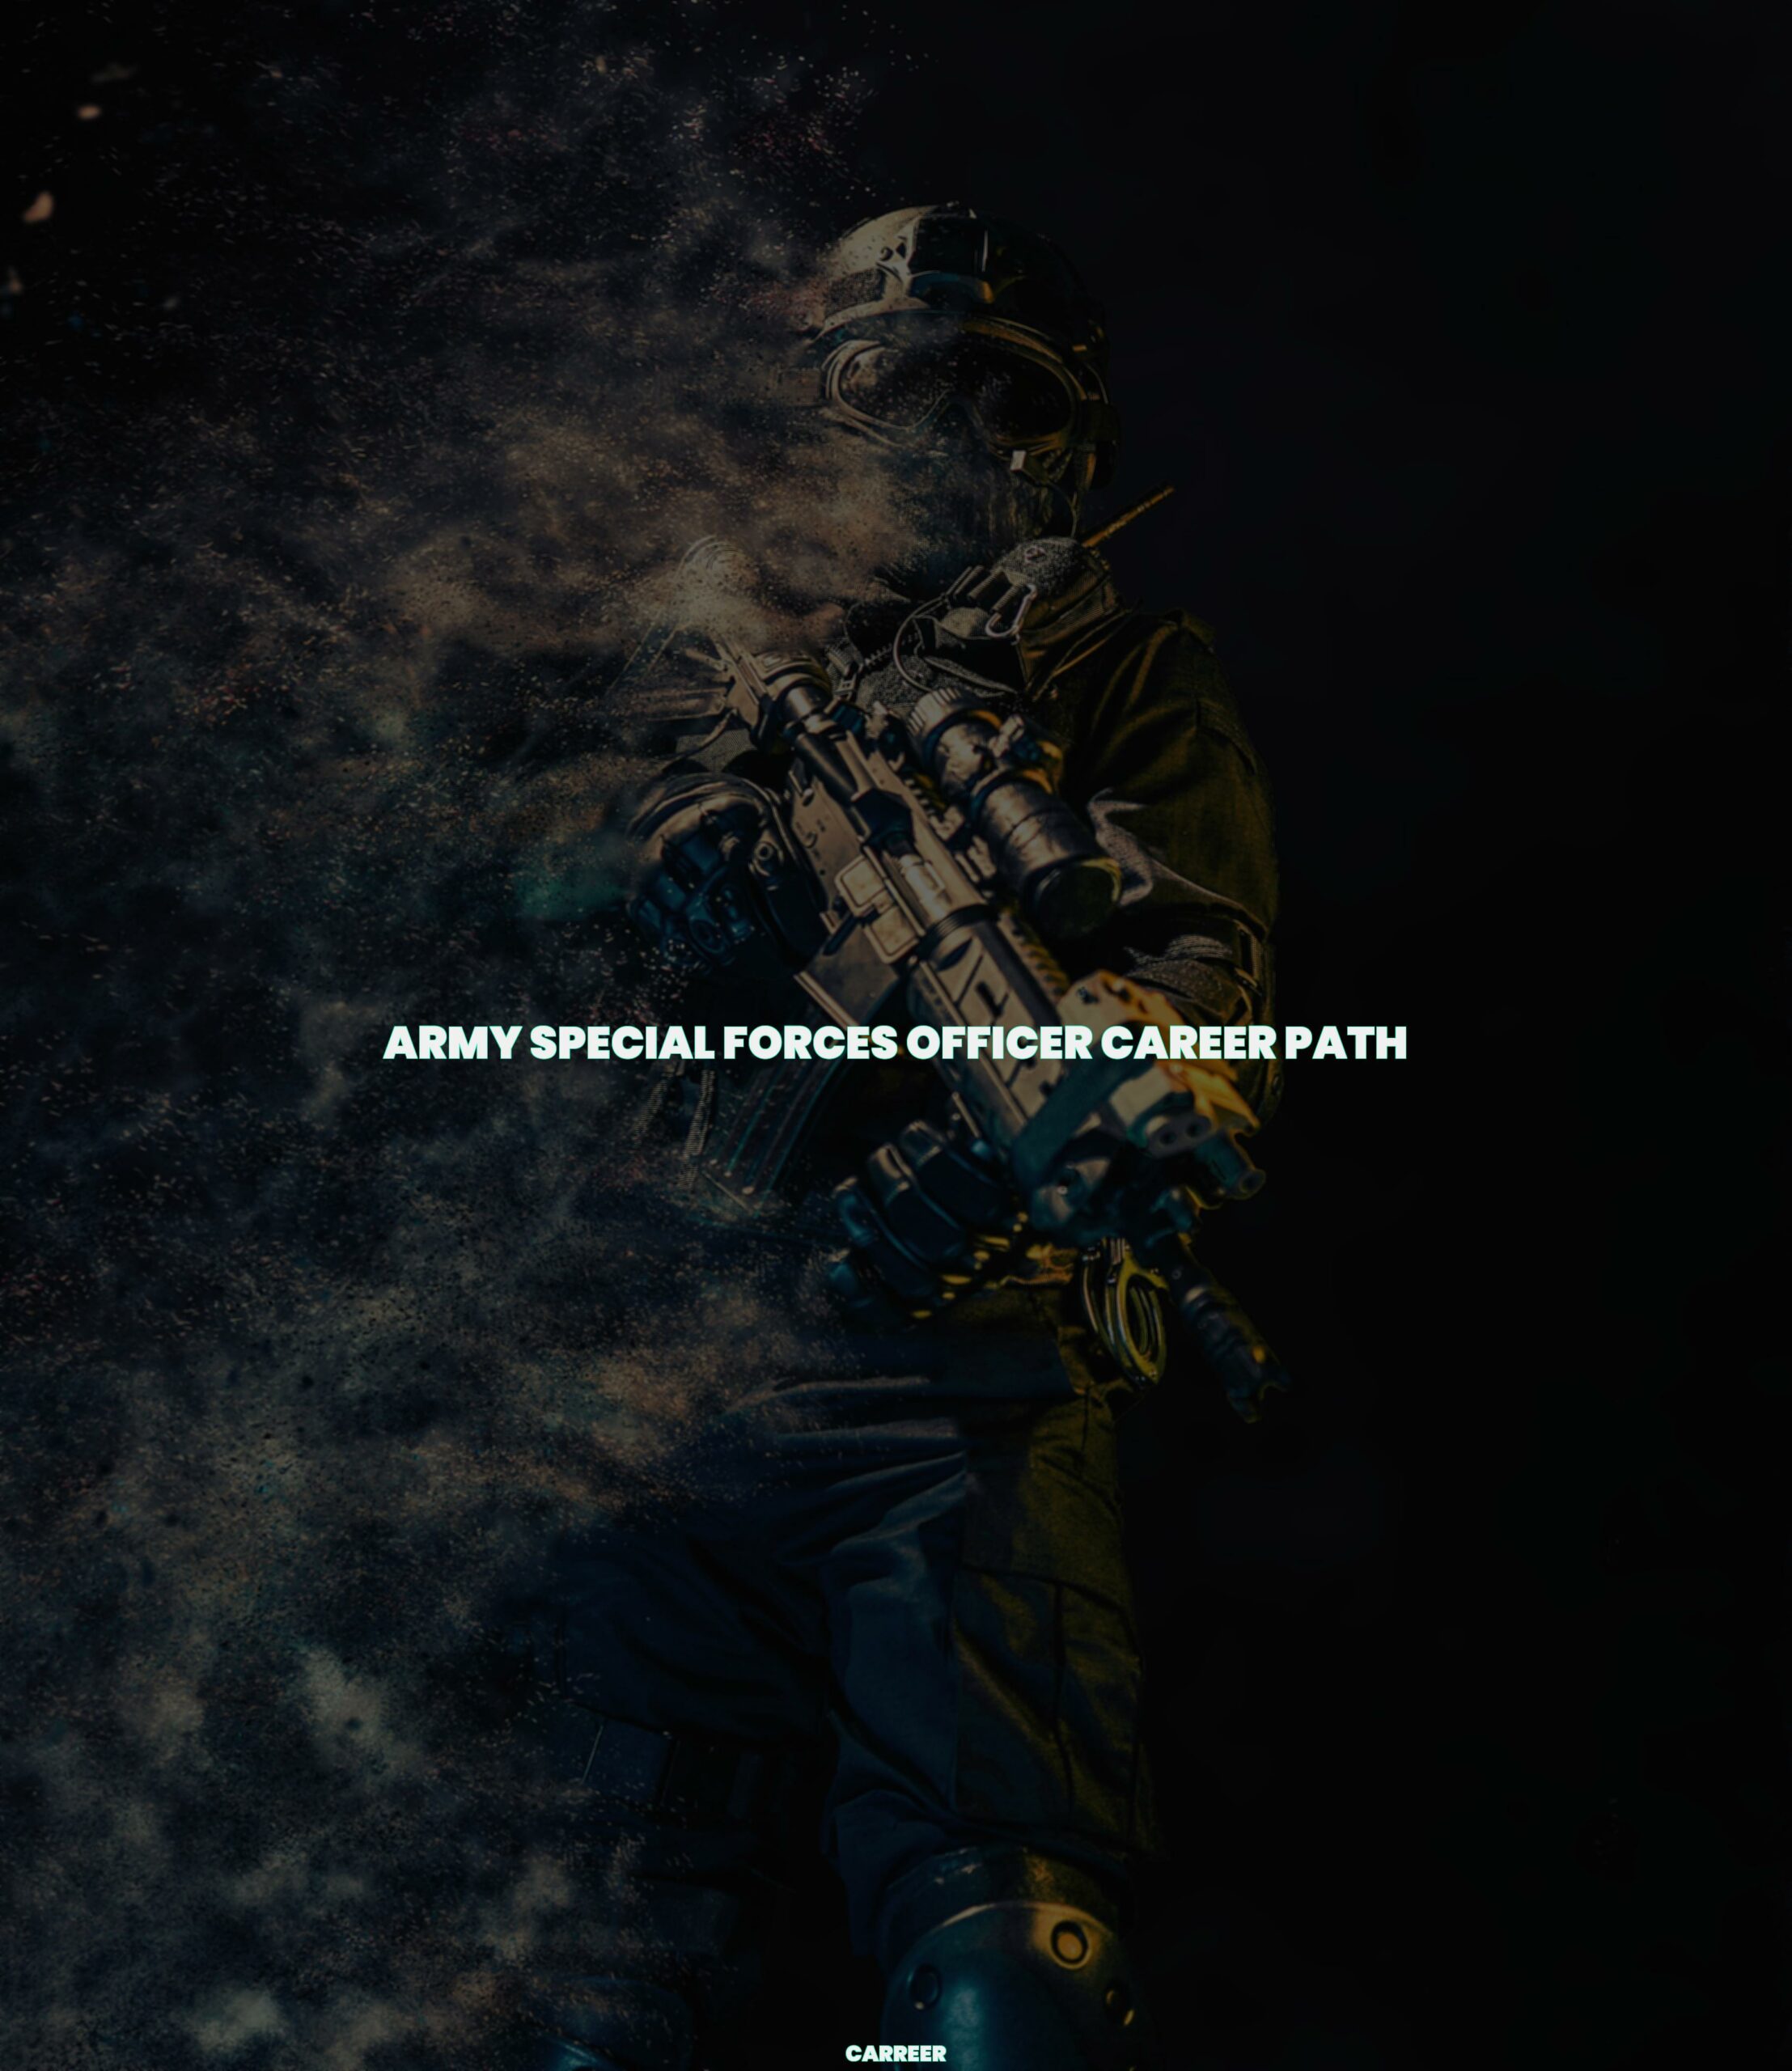 Army special forces officer career path